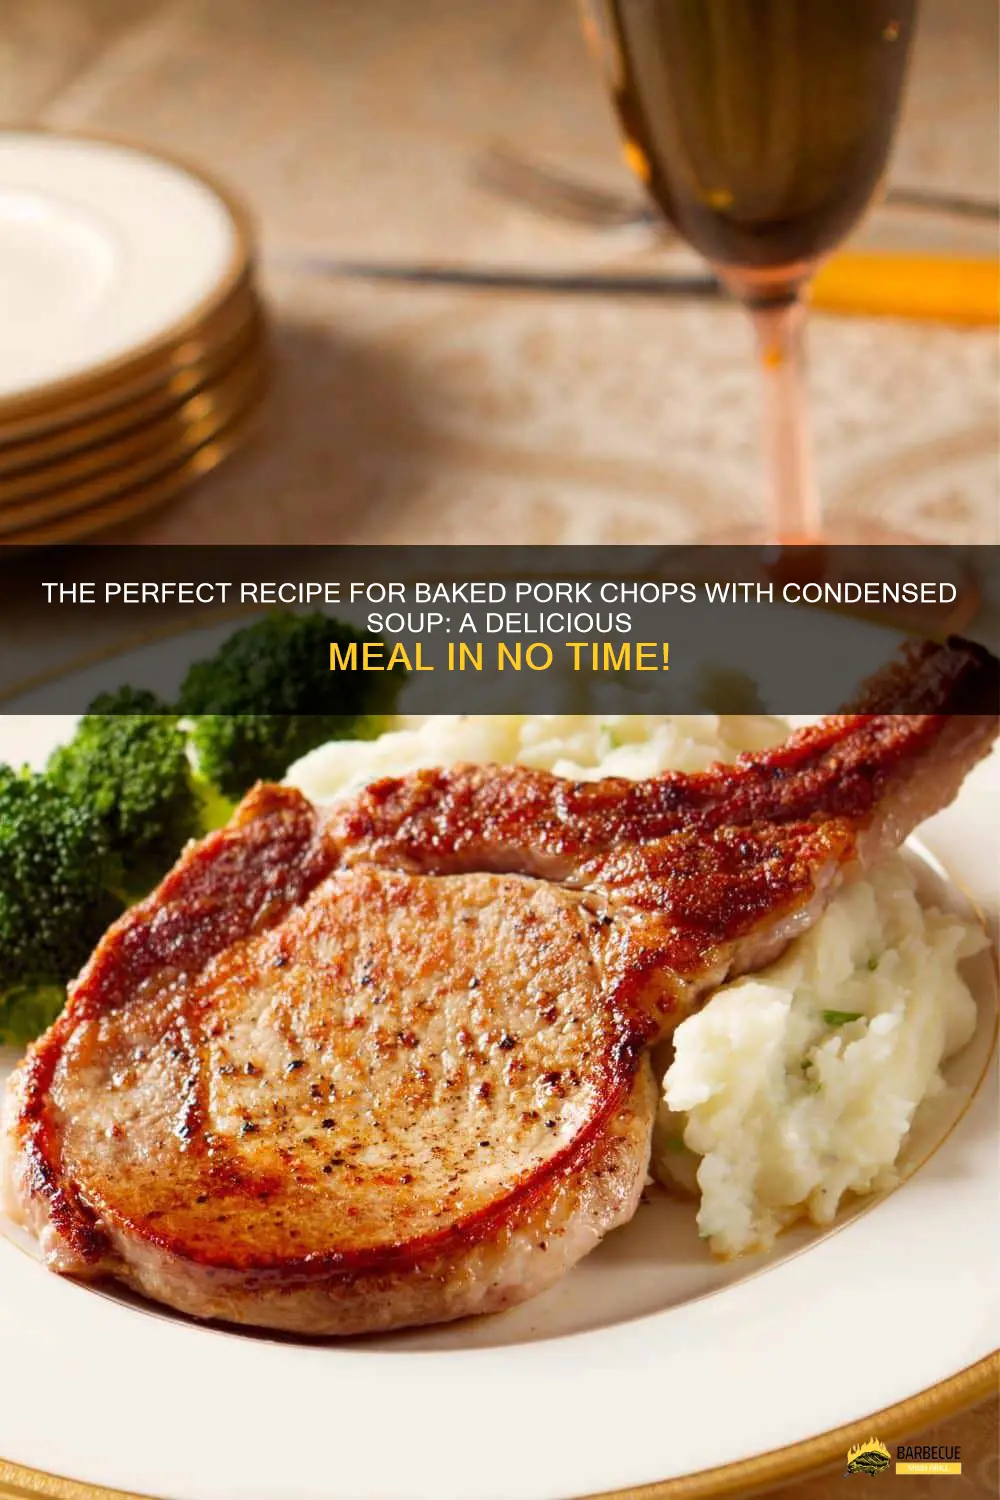 The Perfect Recipe For Baked Pork Chops With Condensed Soup: A ...